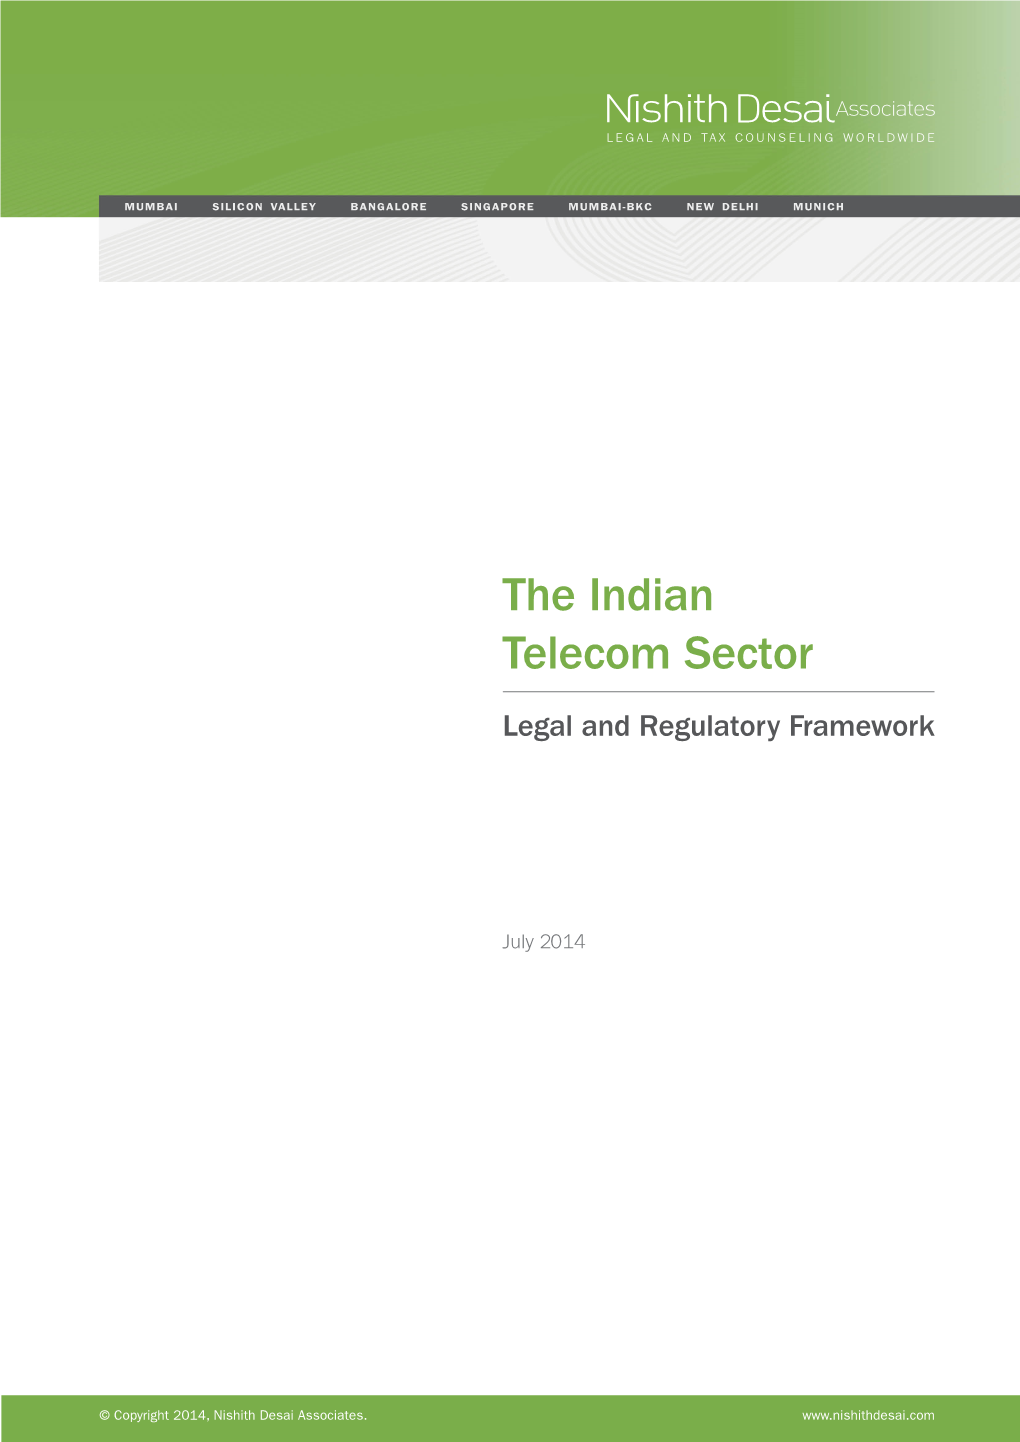 The Indian Telecom Sector